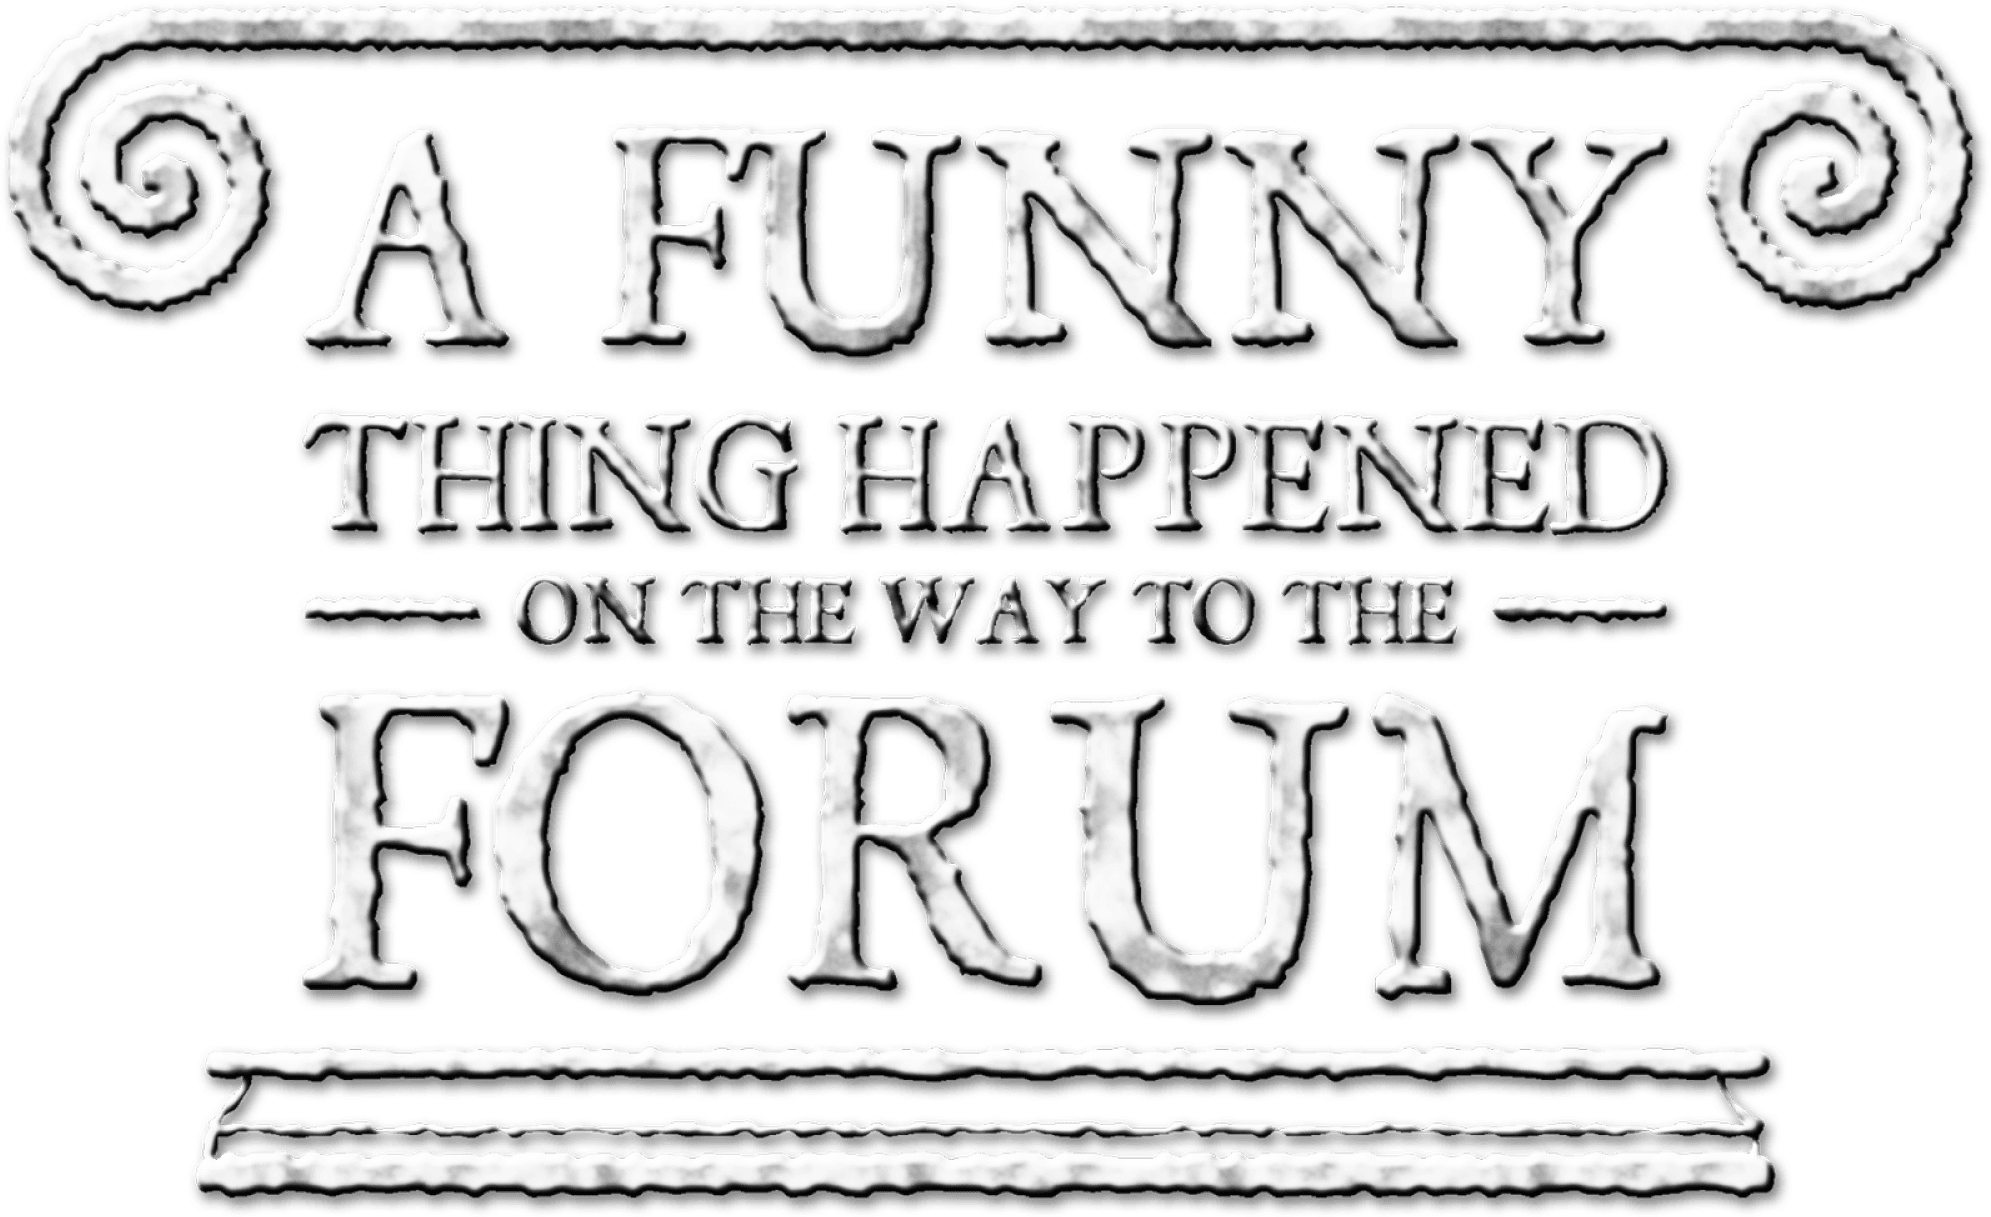 A Funny Thing Happened on the Way to the Forum logo